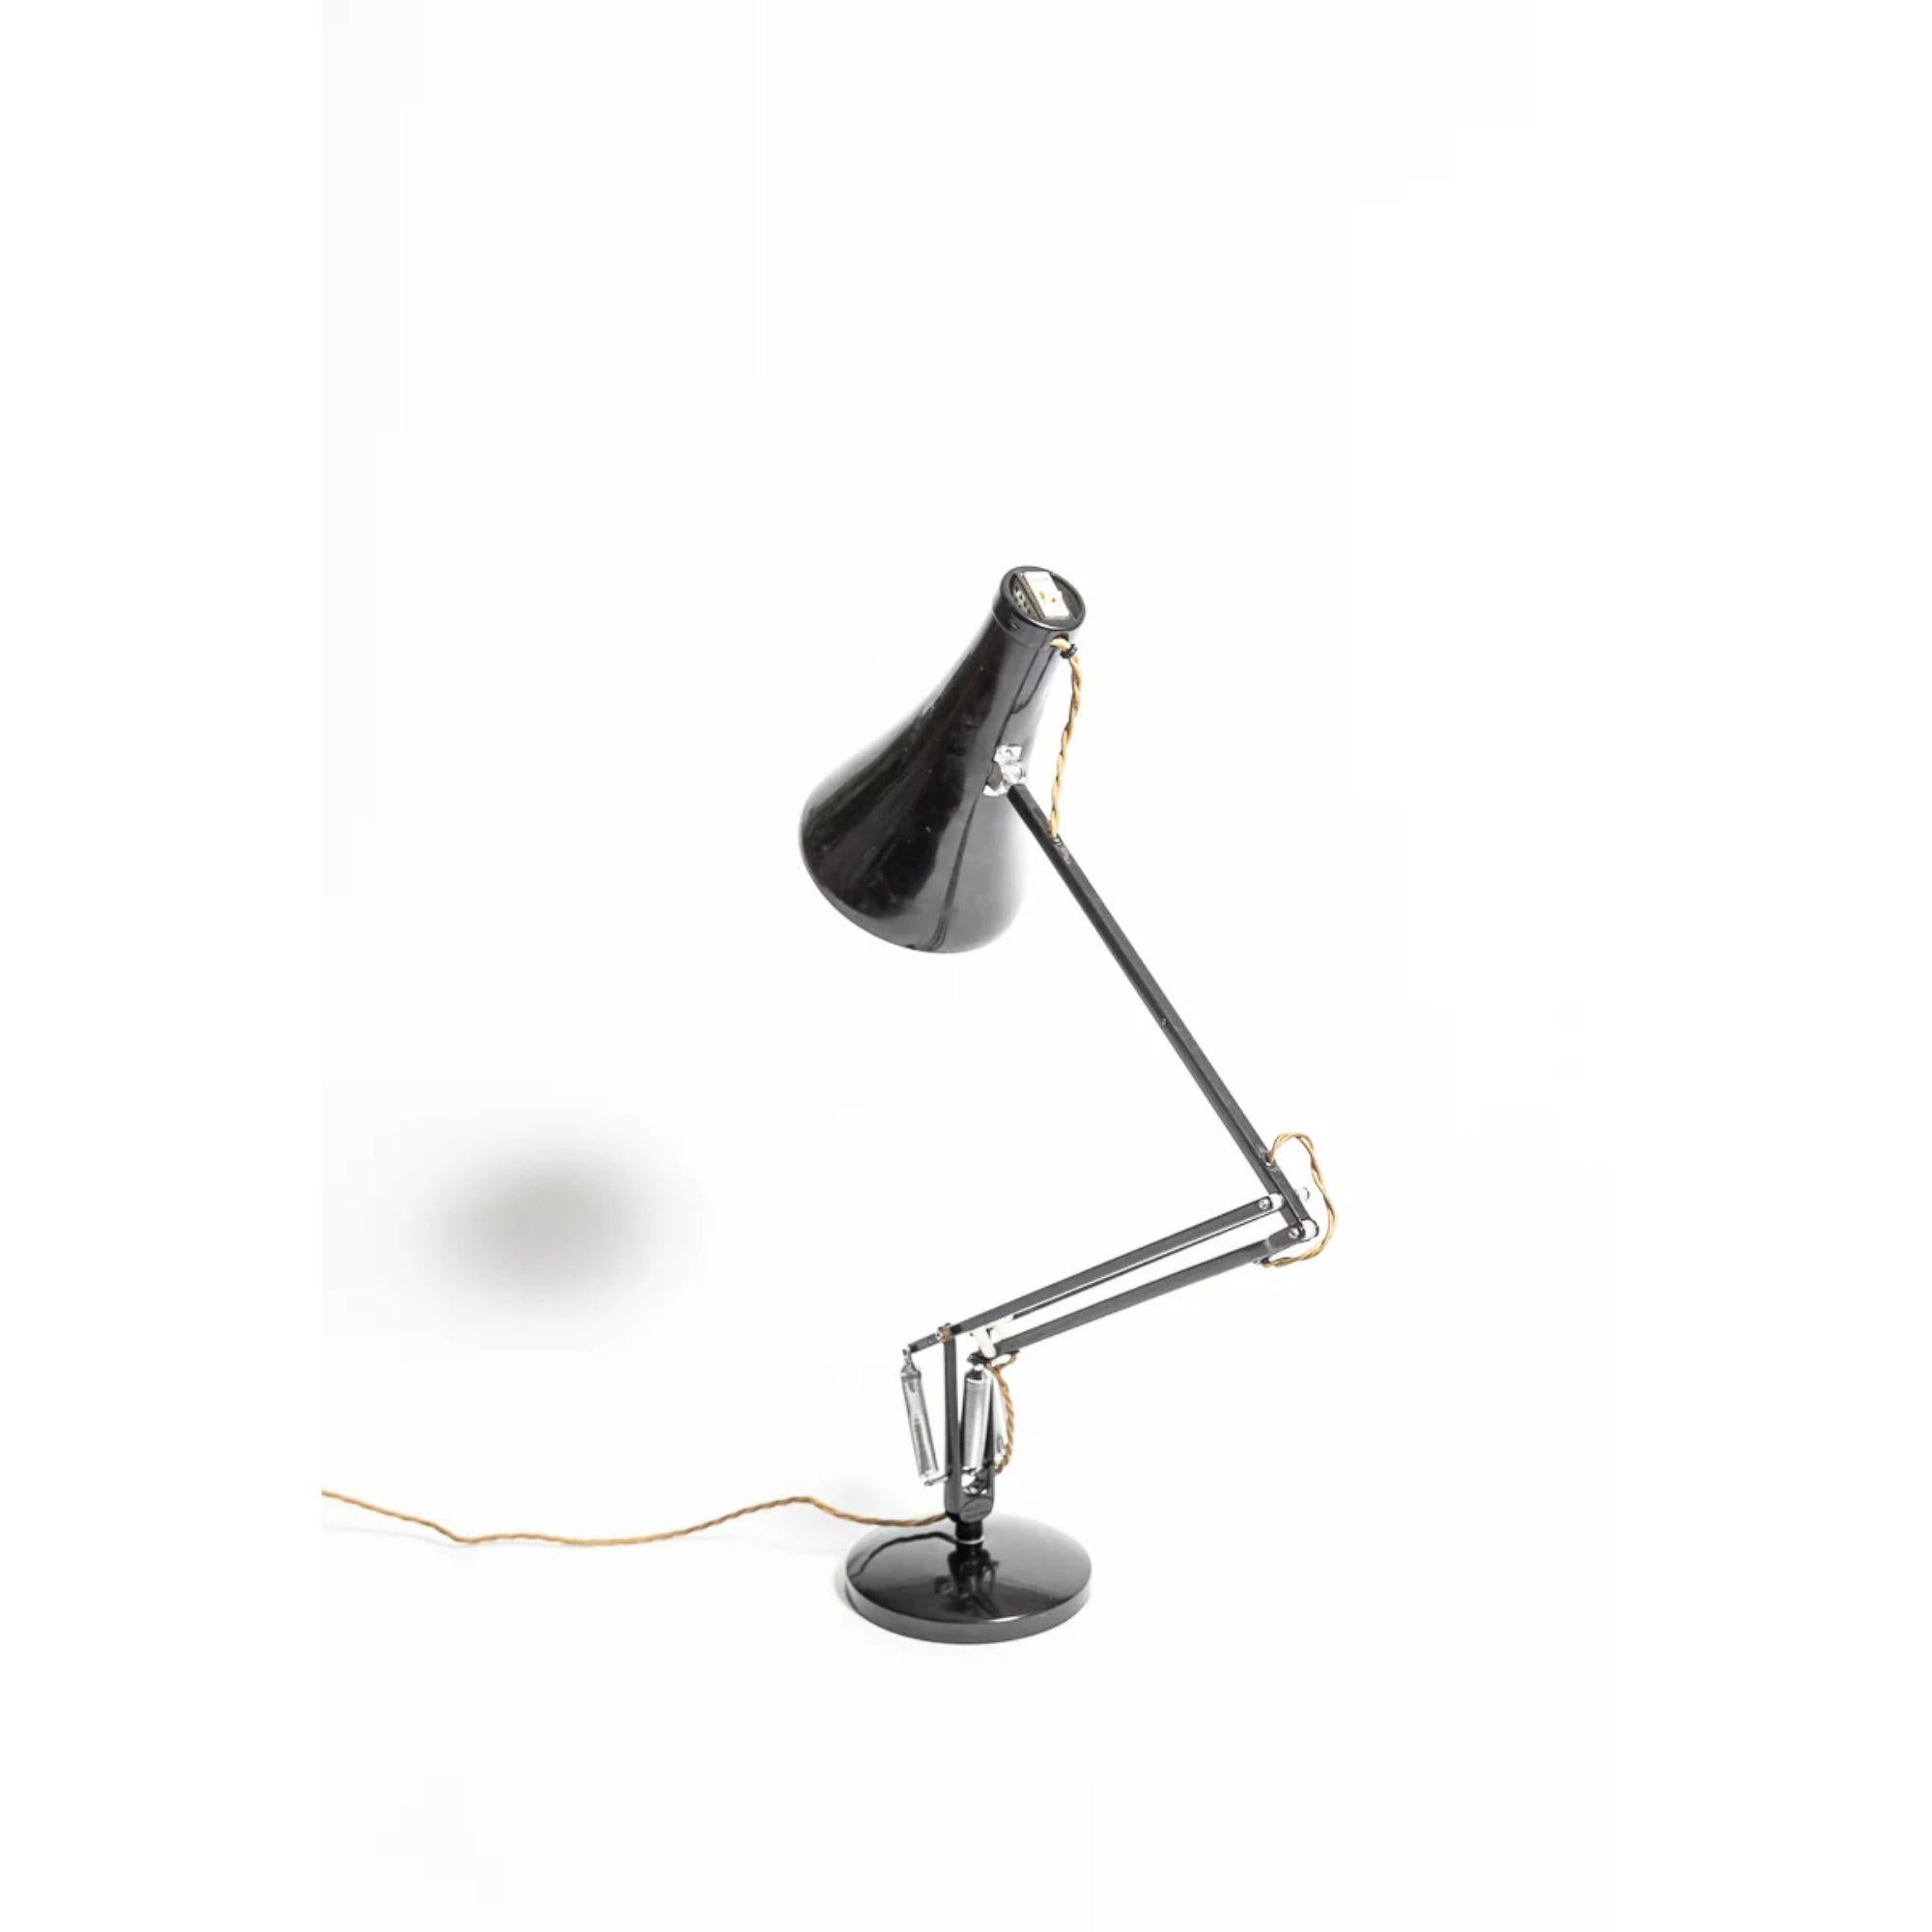 20th Century Herbert Terry and Sons Model 75 Anglepoise Desk Lamp, circa 1970